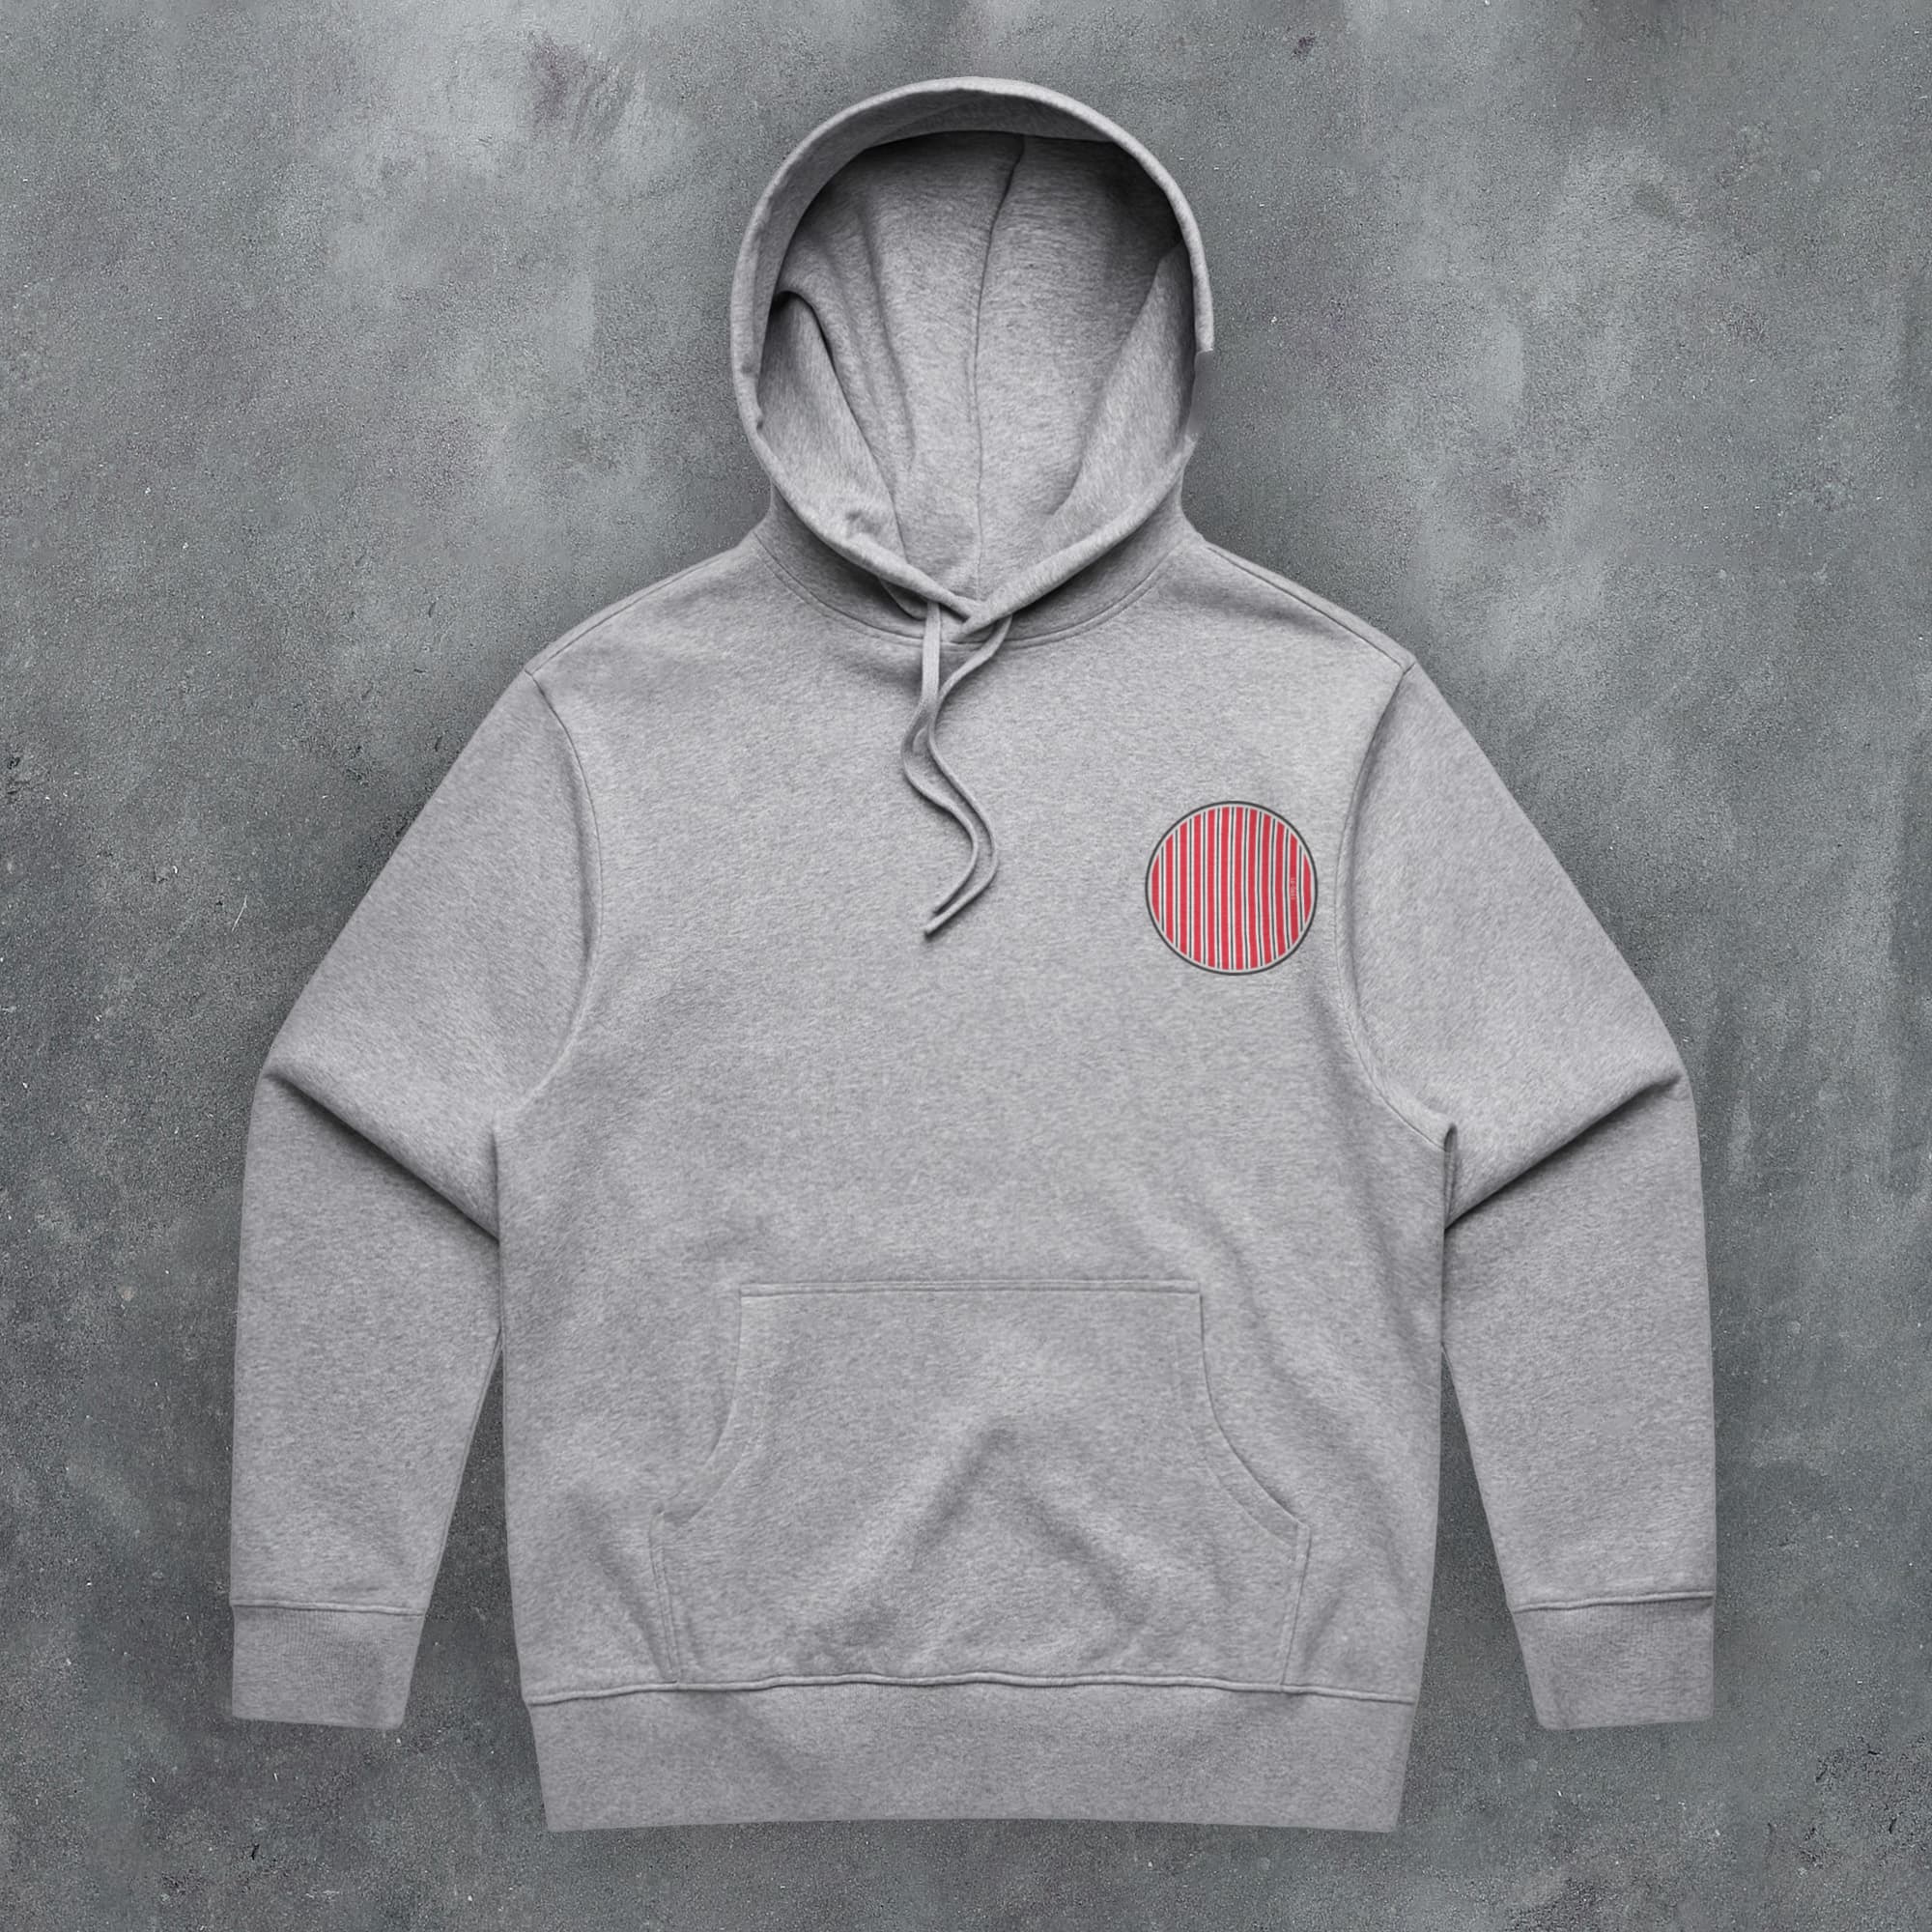 a grey hoodie with a red circle on it